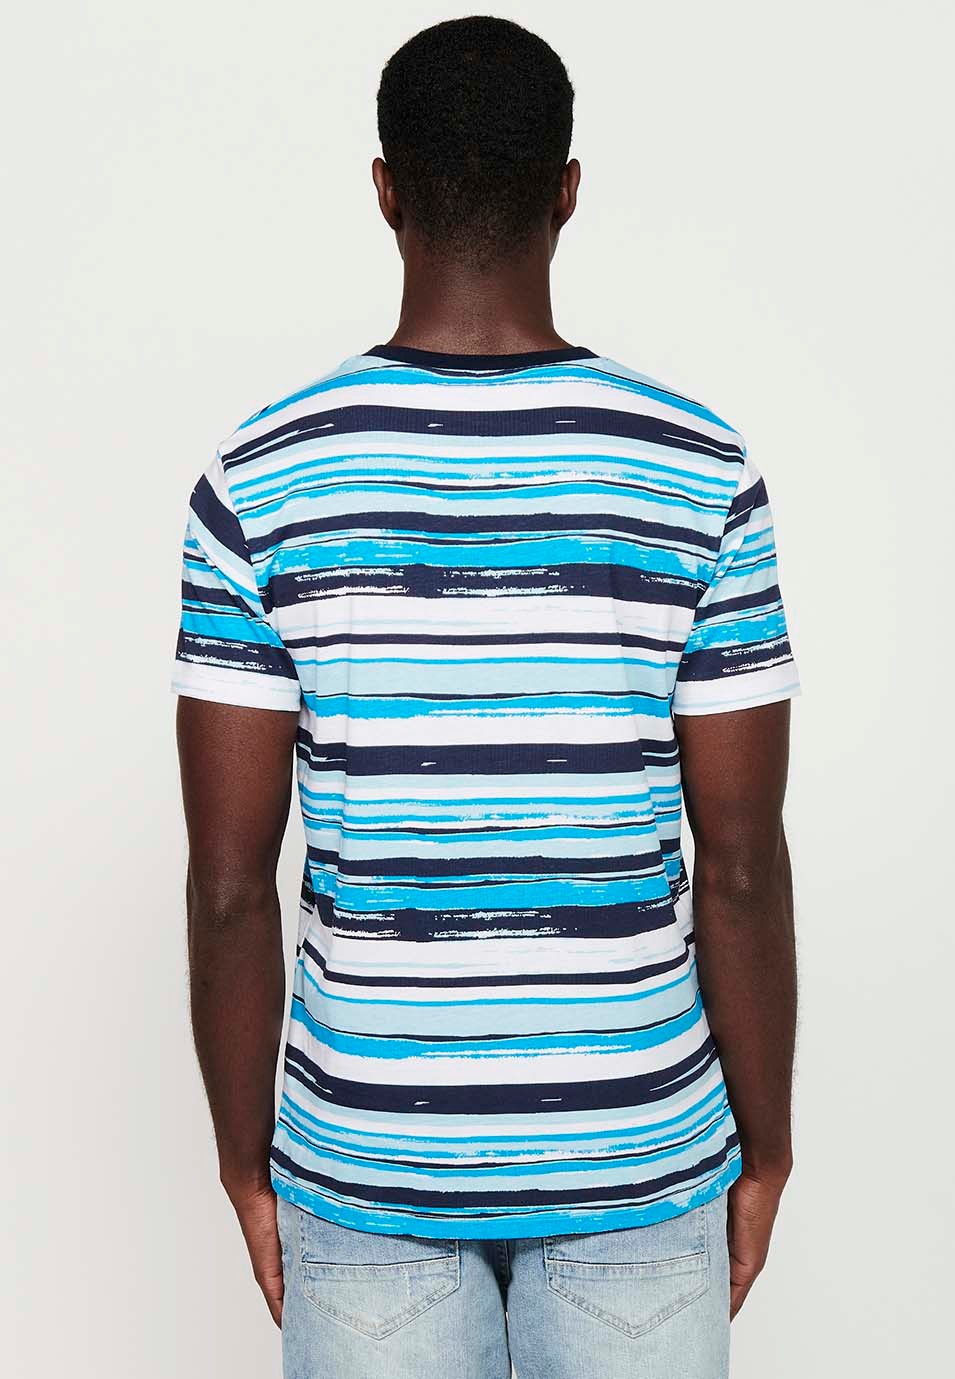 Short-sleeved T-shirt, striped print and round neck, multicolored for men